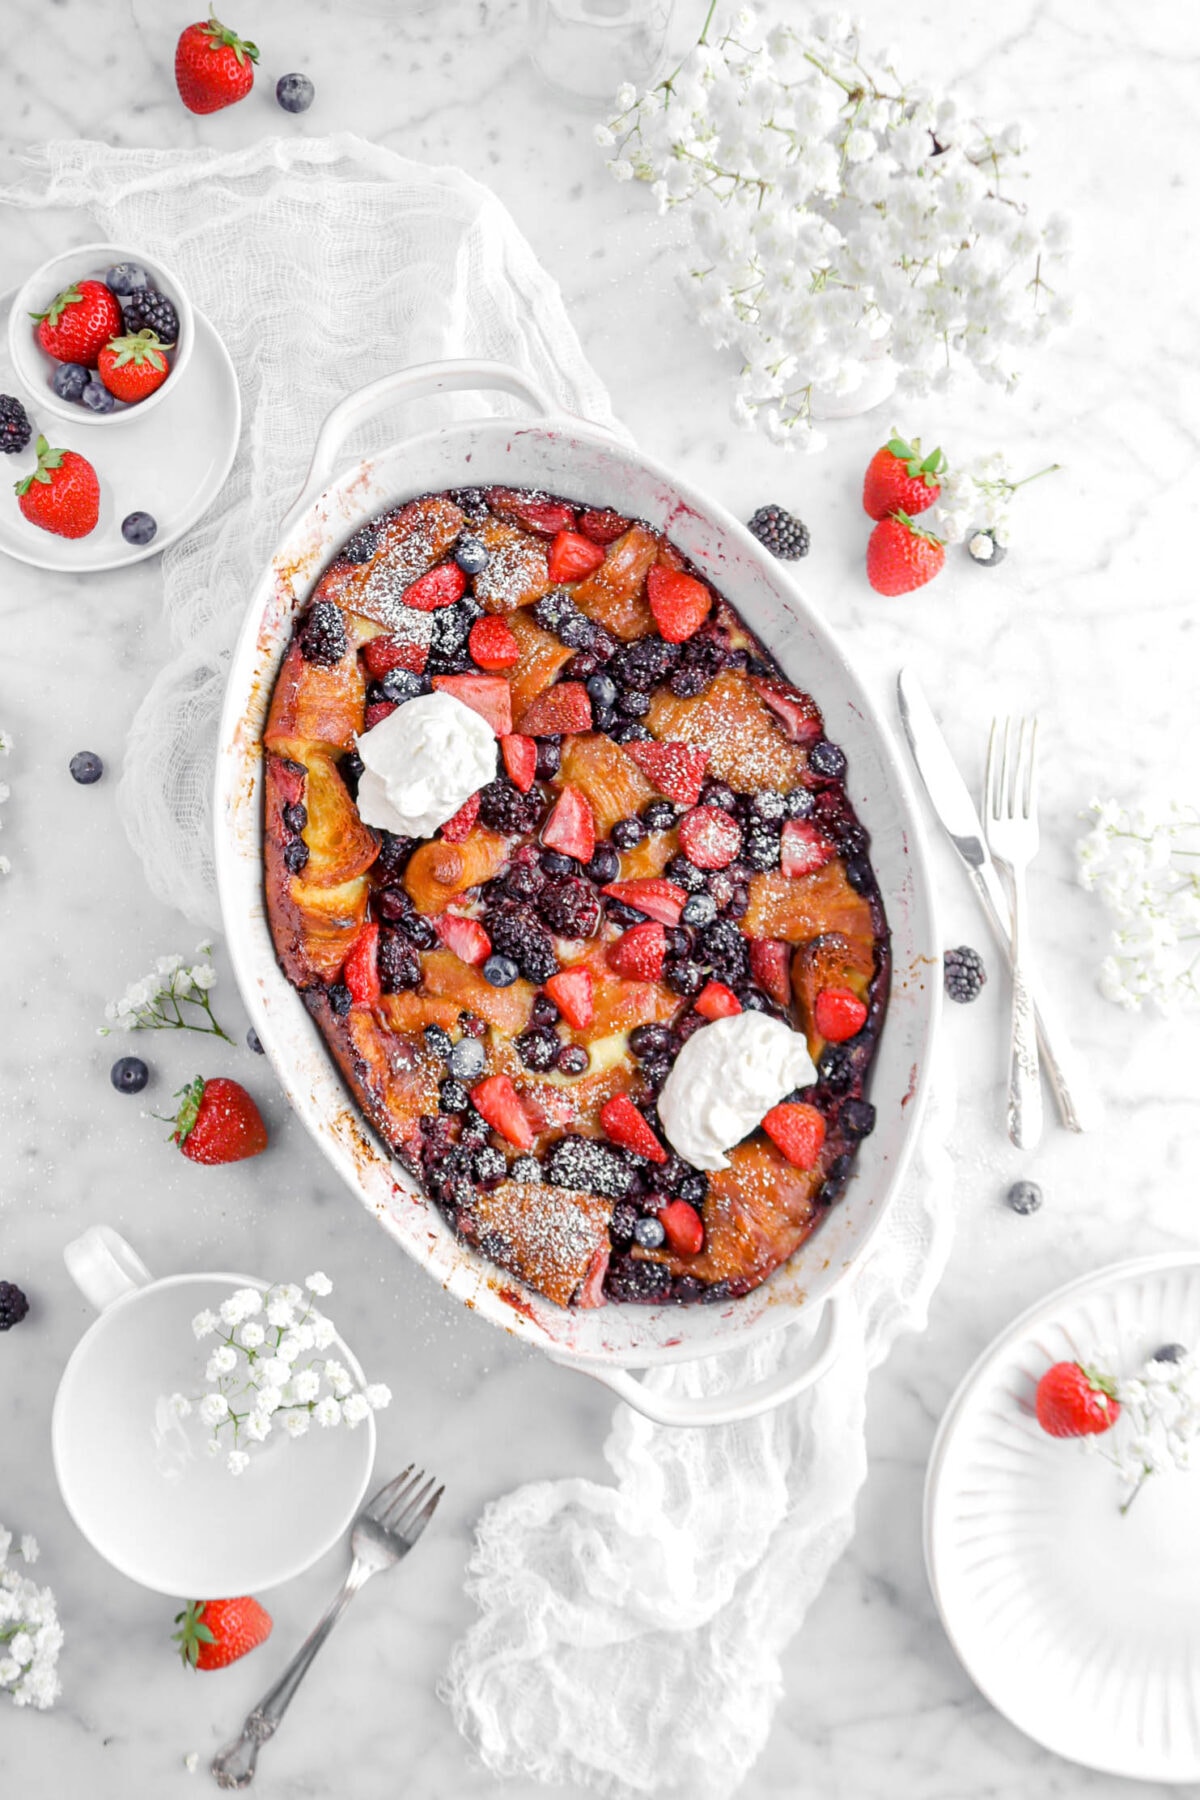 berry bake in white casserole with powdered sugar and whipped cream on top, with white cheese cloth, flowers, whole berries, and plates around